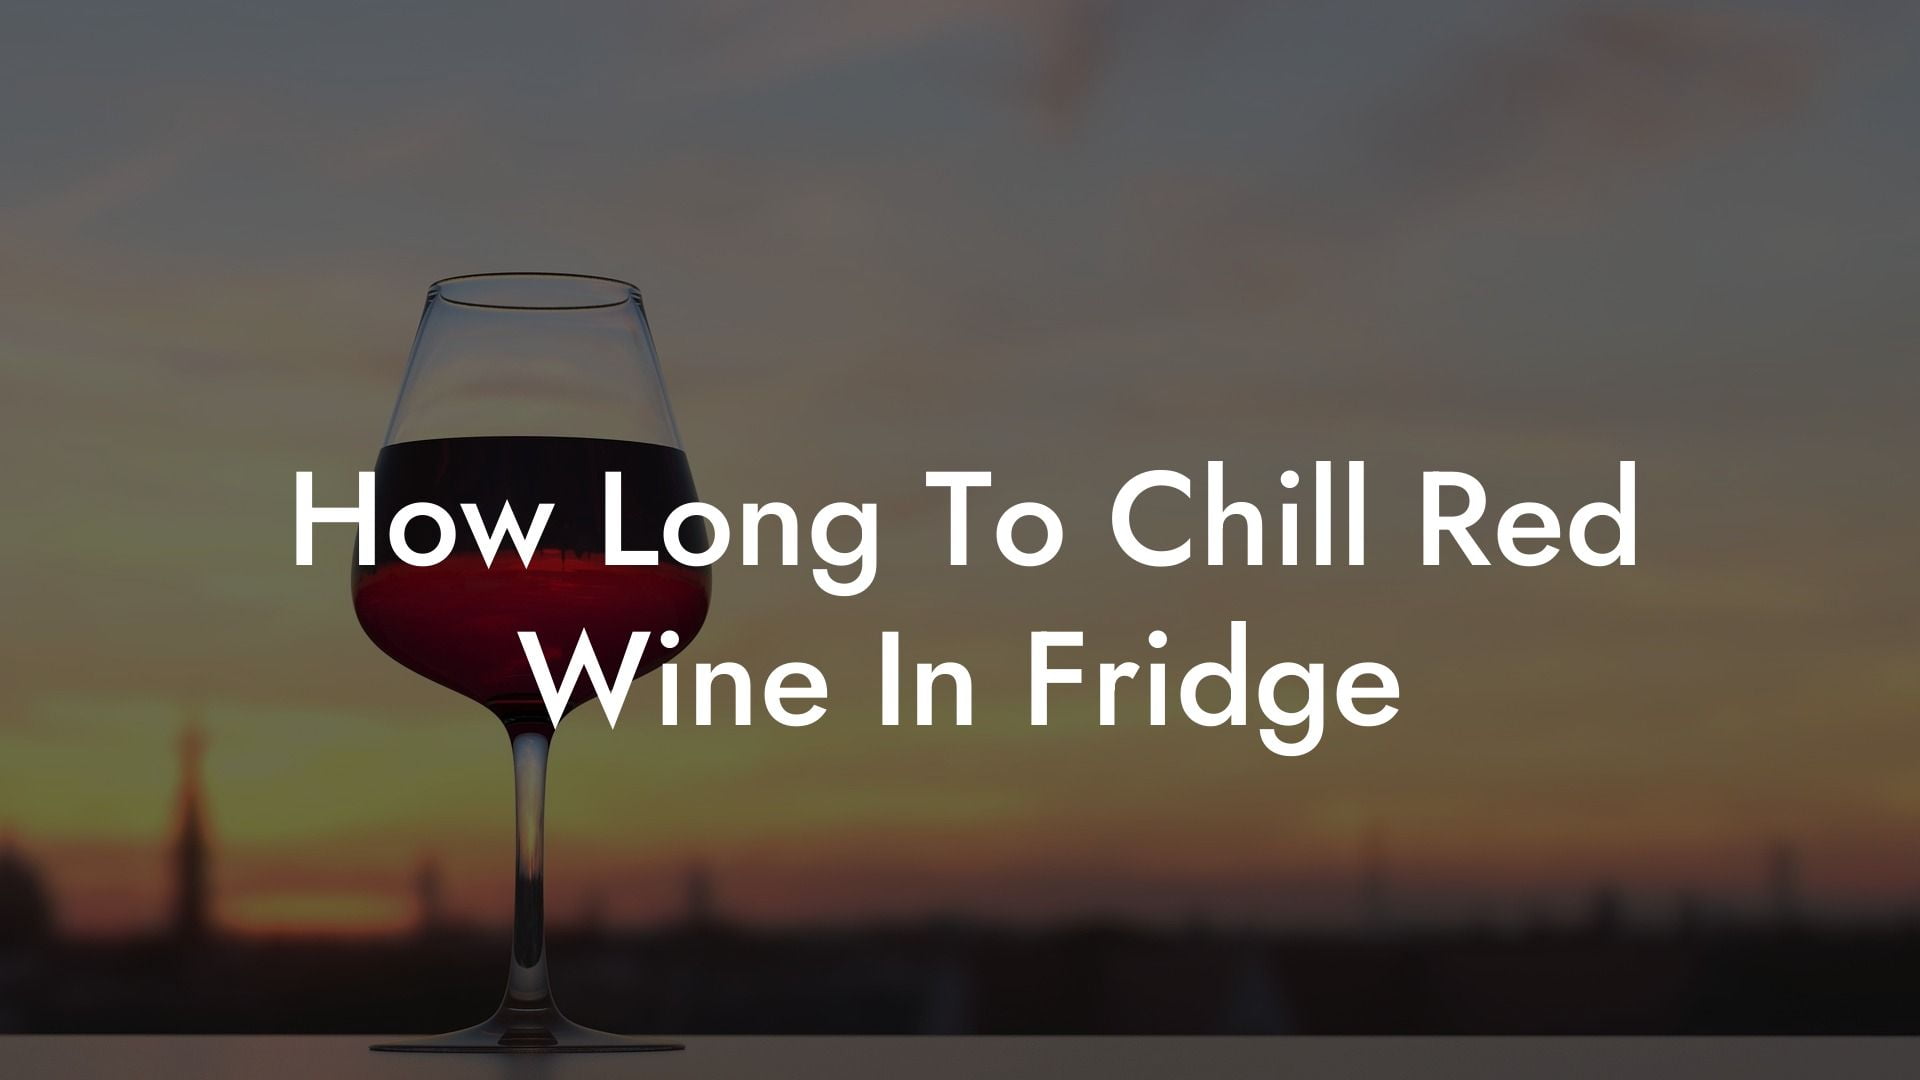 How Long To Chill Red Wine In Fridge